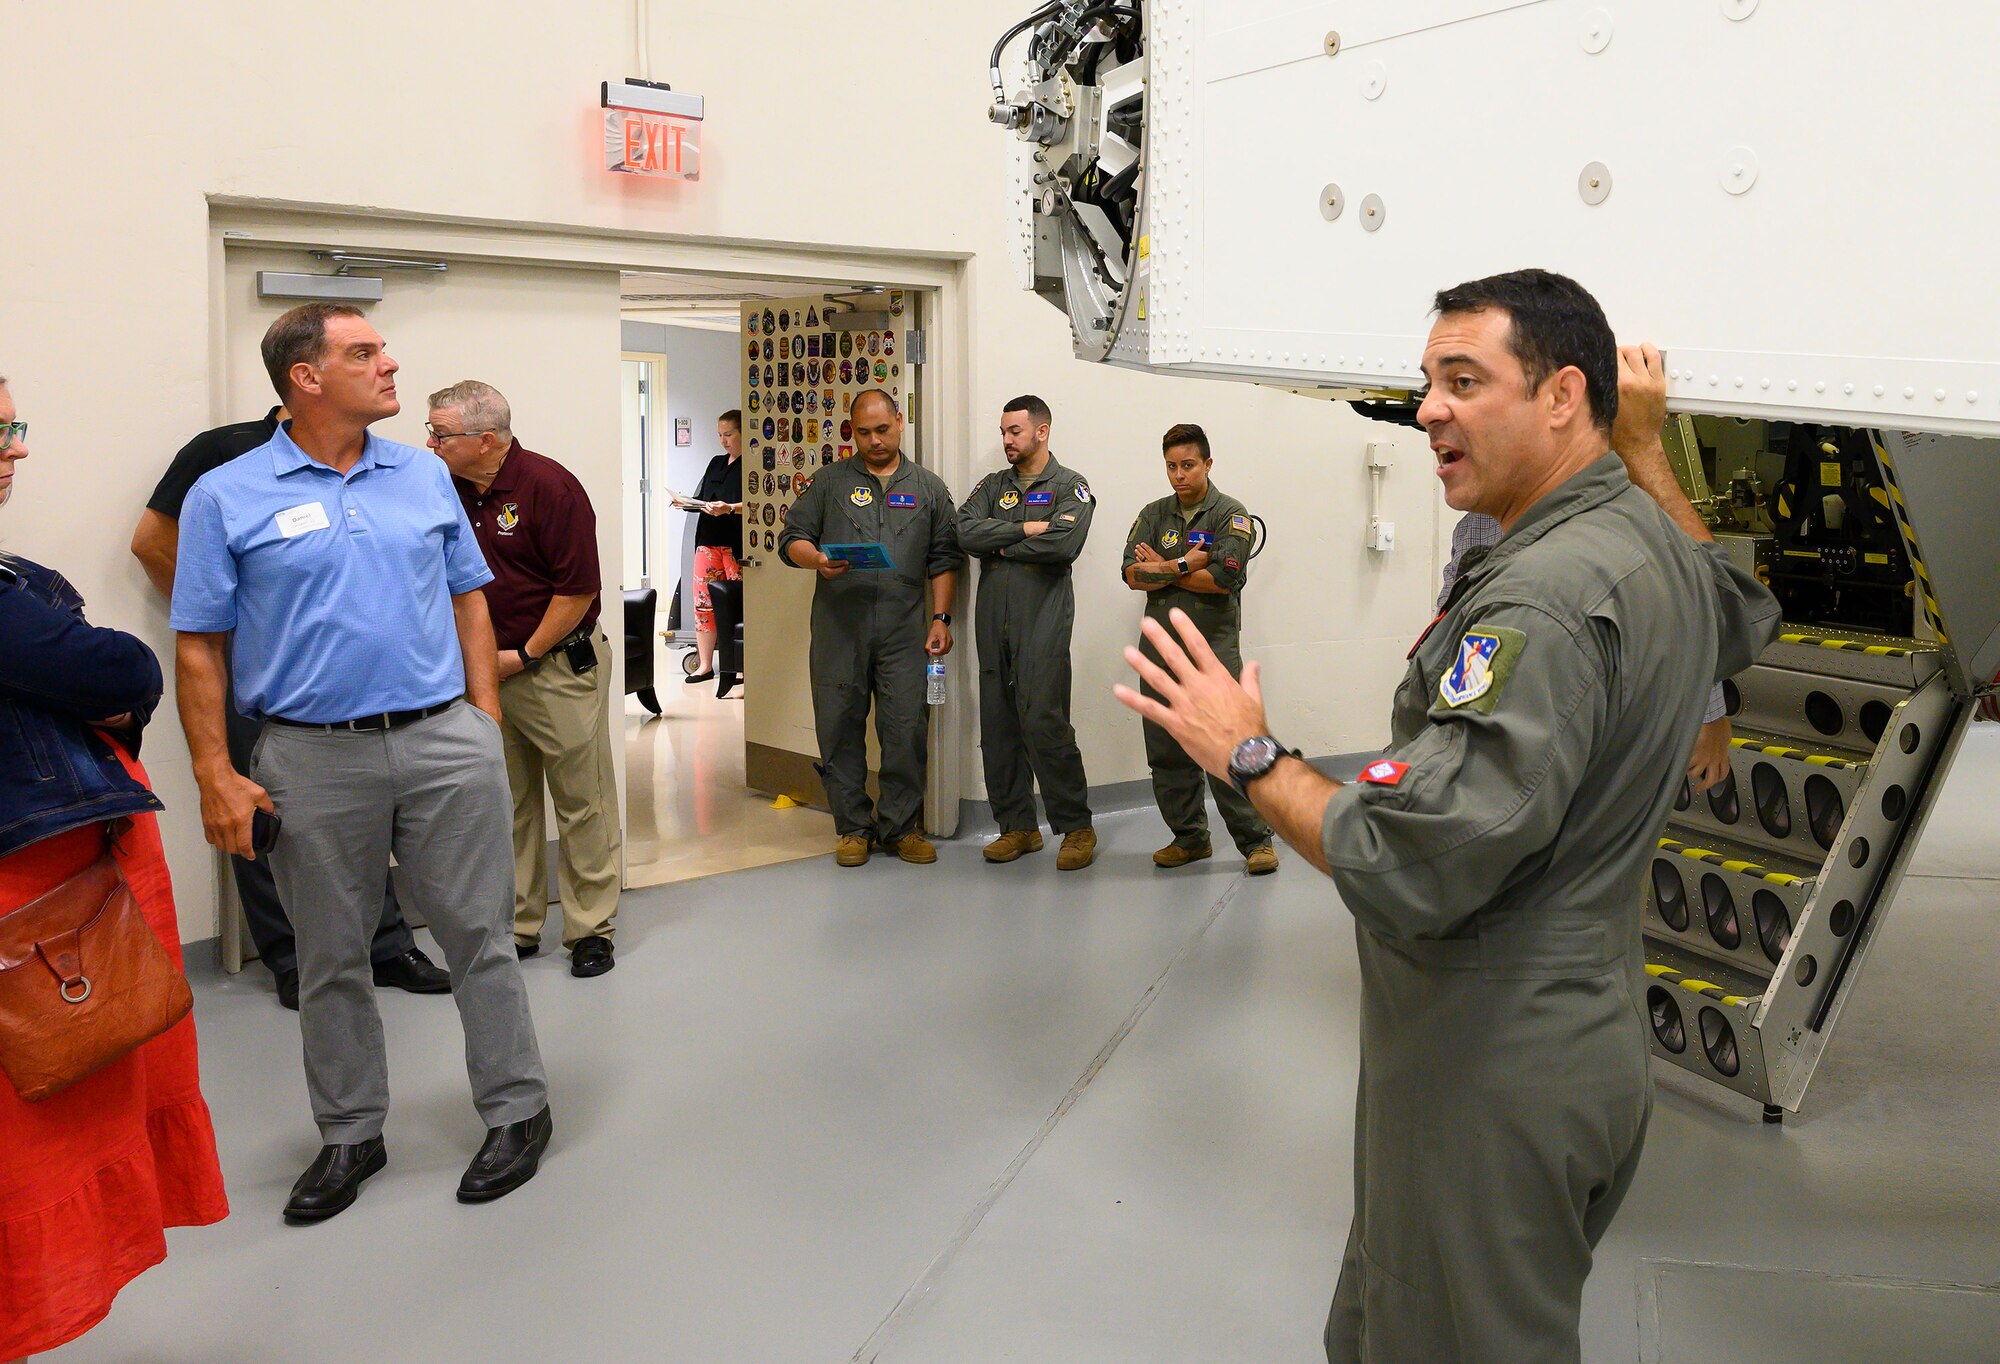 Tech. Sgt. Tony Longinotti, U.S. Air Force School of Aerospace Medicine’s Accelerations Operations Section chief, shows Leadership Dayton program members the 711th Human Performance Wing’s centrifuge July 14 at Wright-Patterson Air Force Base. Longinotti told the group how the centrifuge is used to both conduct research and train Airmen. (U.S. Air Force photo by R.J. Oriez)